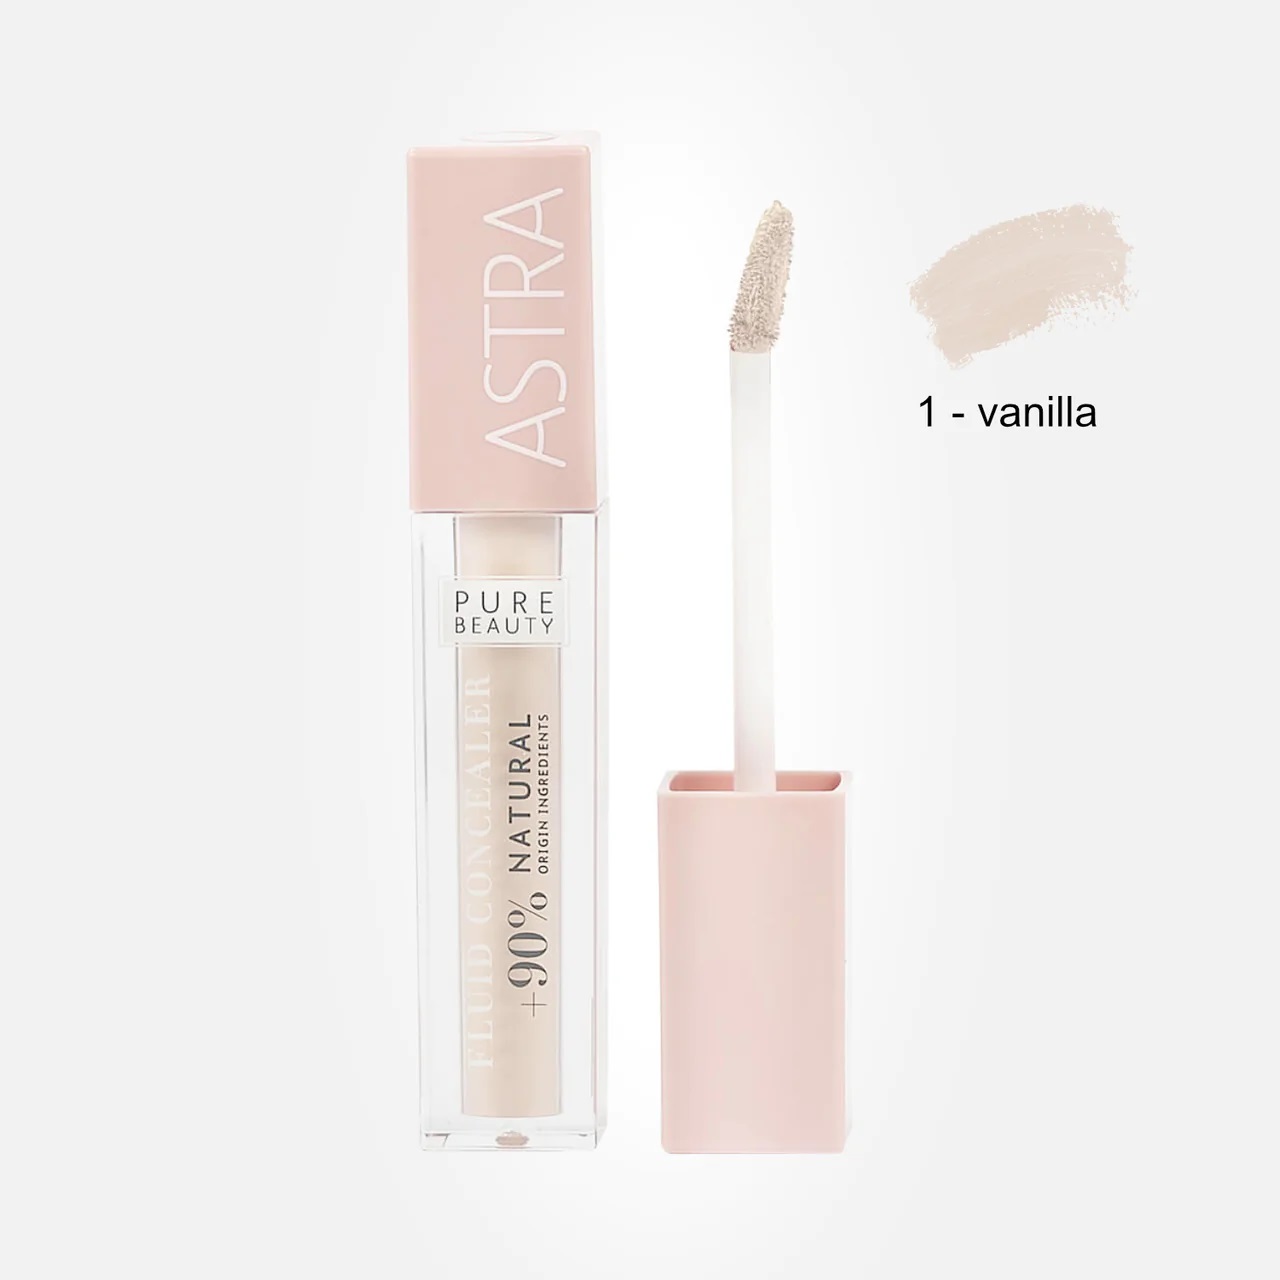 Image of Fluid Concealer 1 Pure Beauty Correttore Fluido Astra